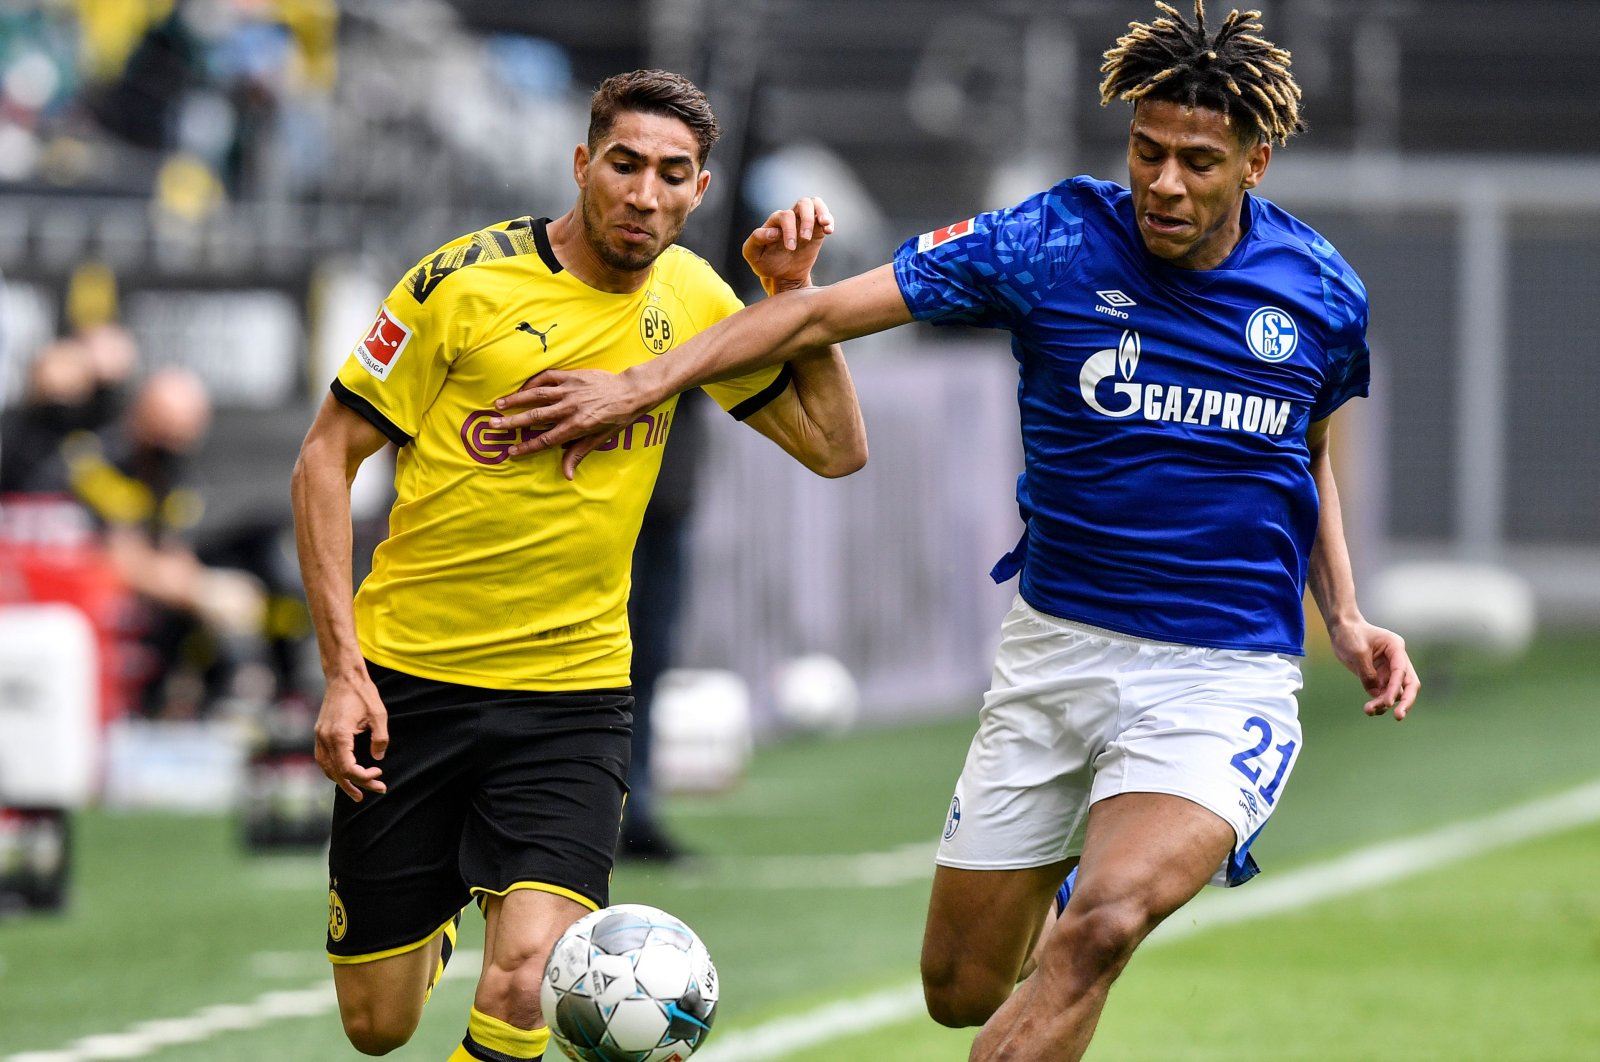 Dortmund's Achraf Hakimi vies for the ball with Schalke's Jean-Clair Todibo during a Bundesliga match in Dortmund, Germany, May 16, 2020. (AFP Photo)